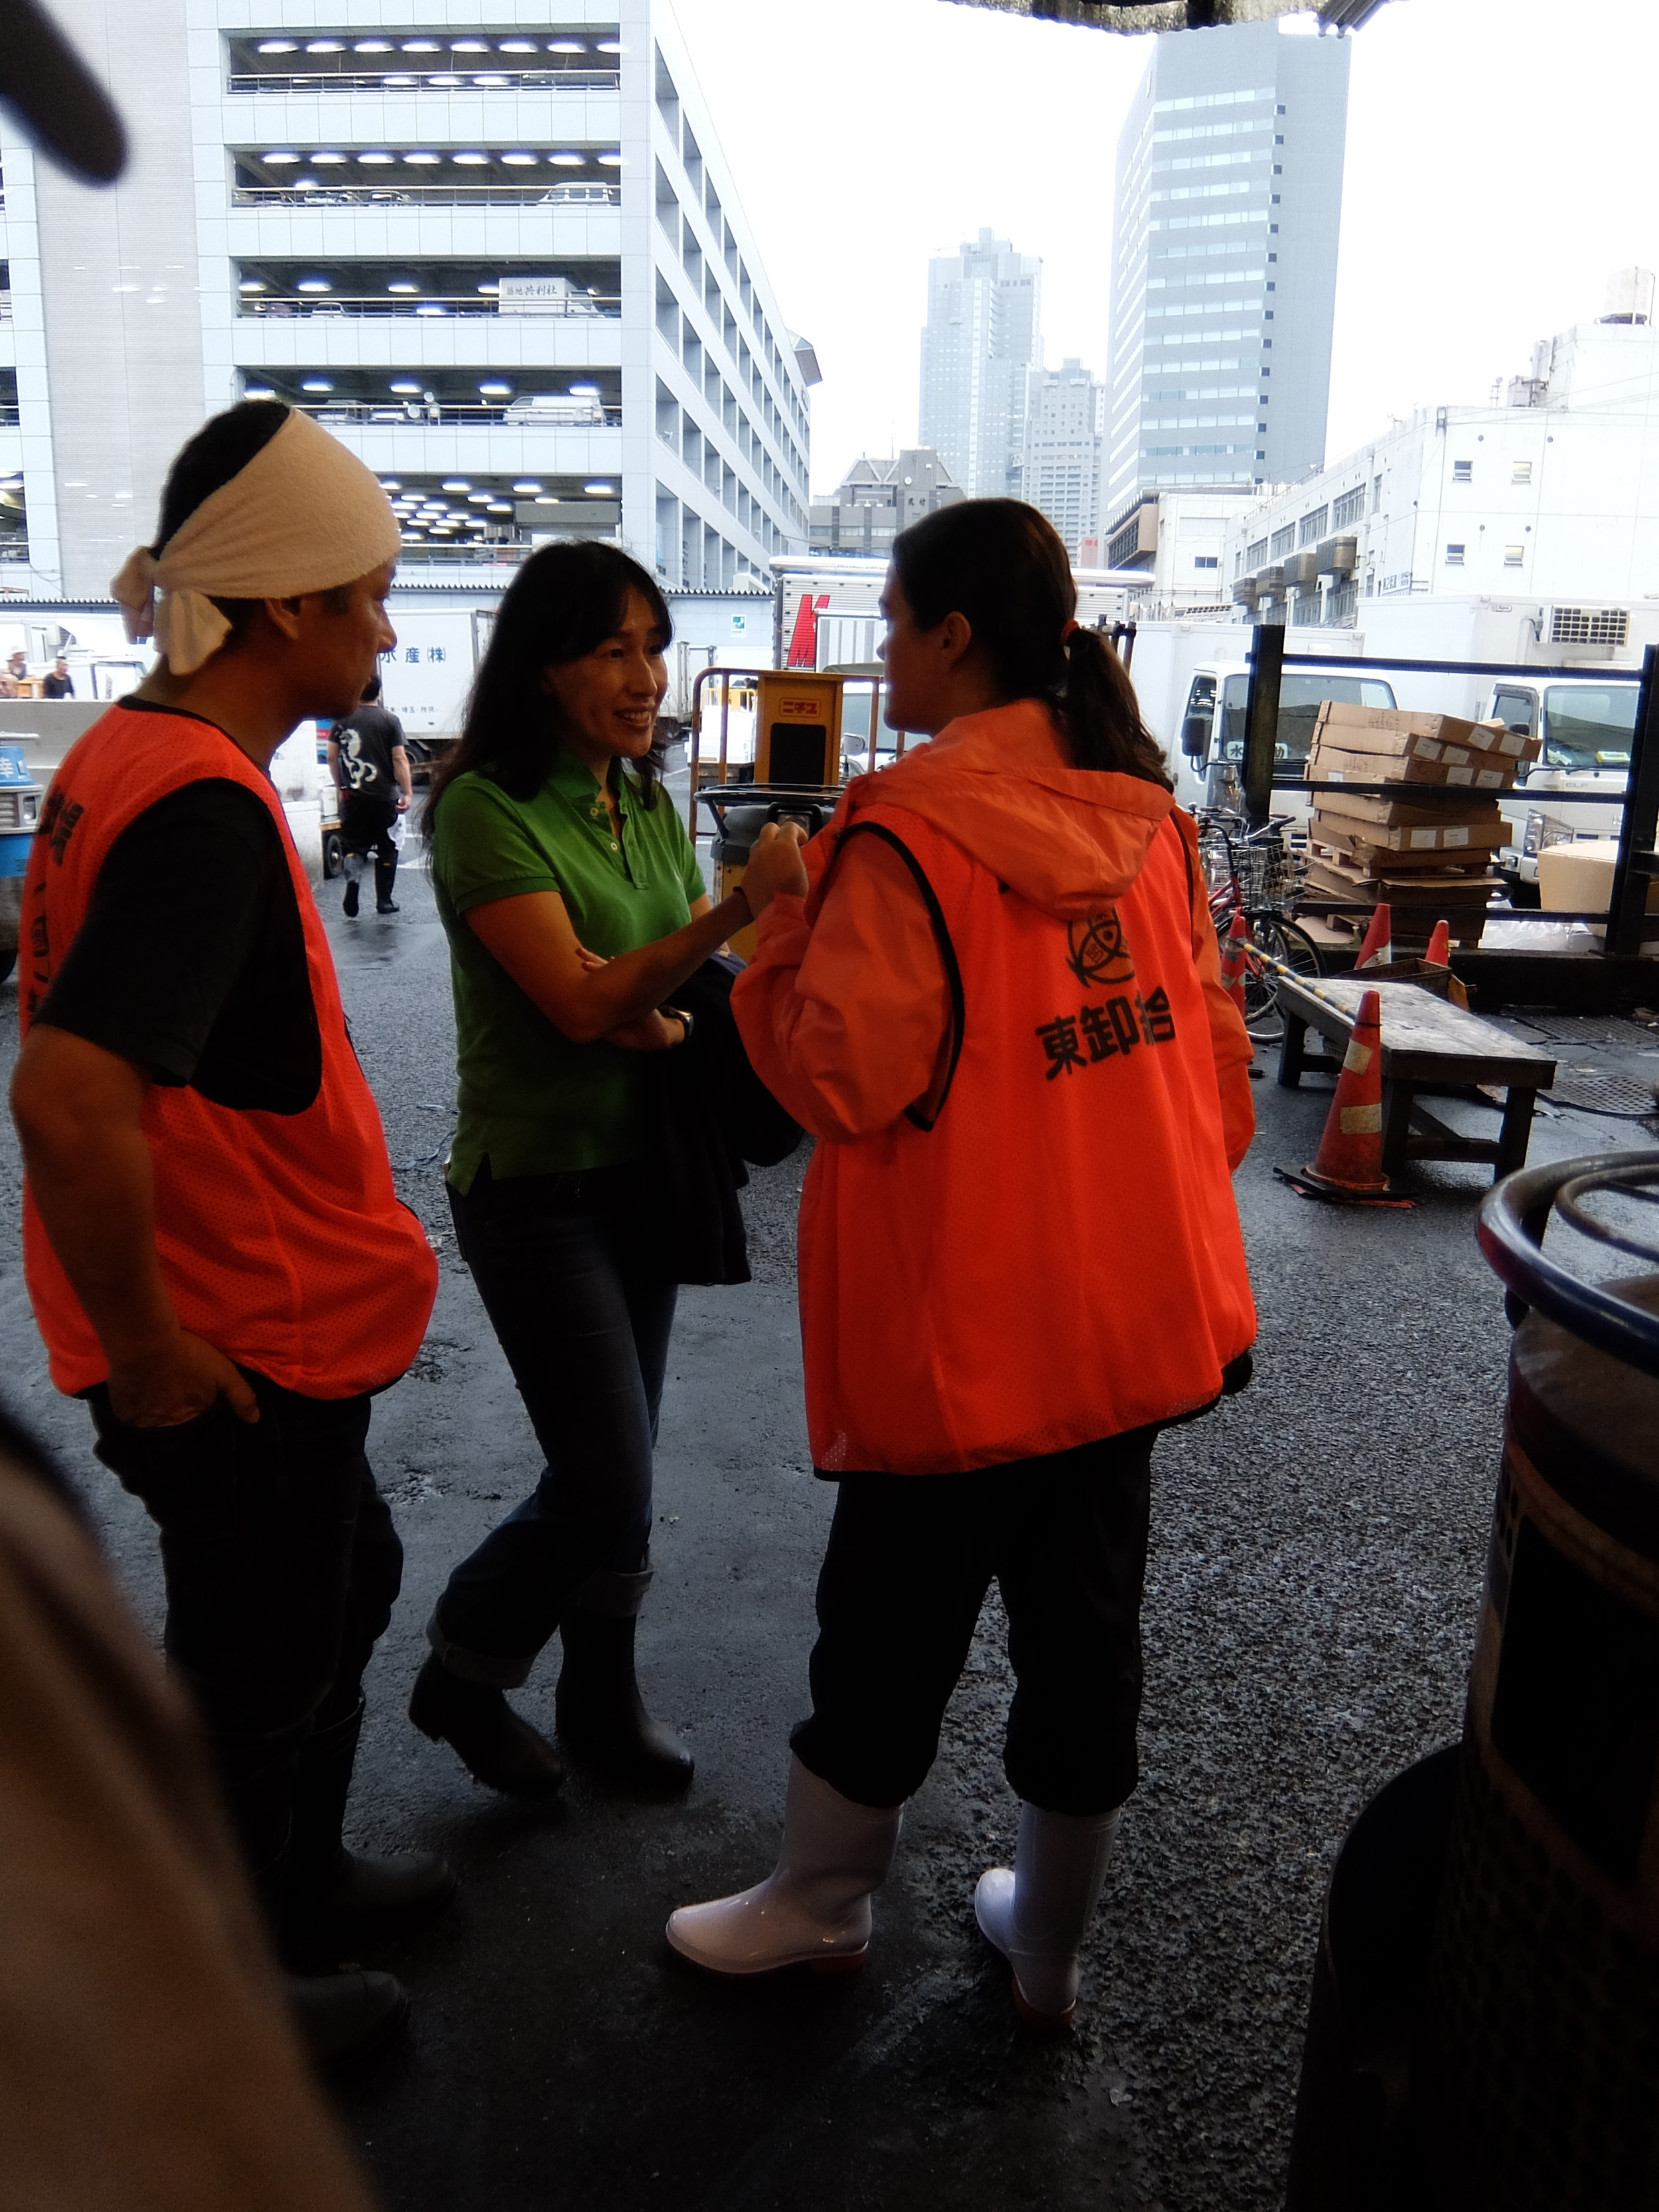 Discussing global warming at the world's largest fish market, Tsukiji in Tokyo